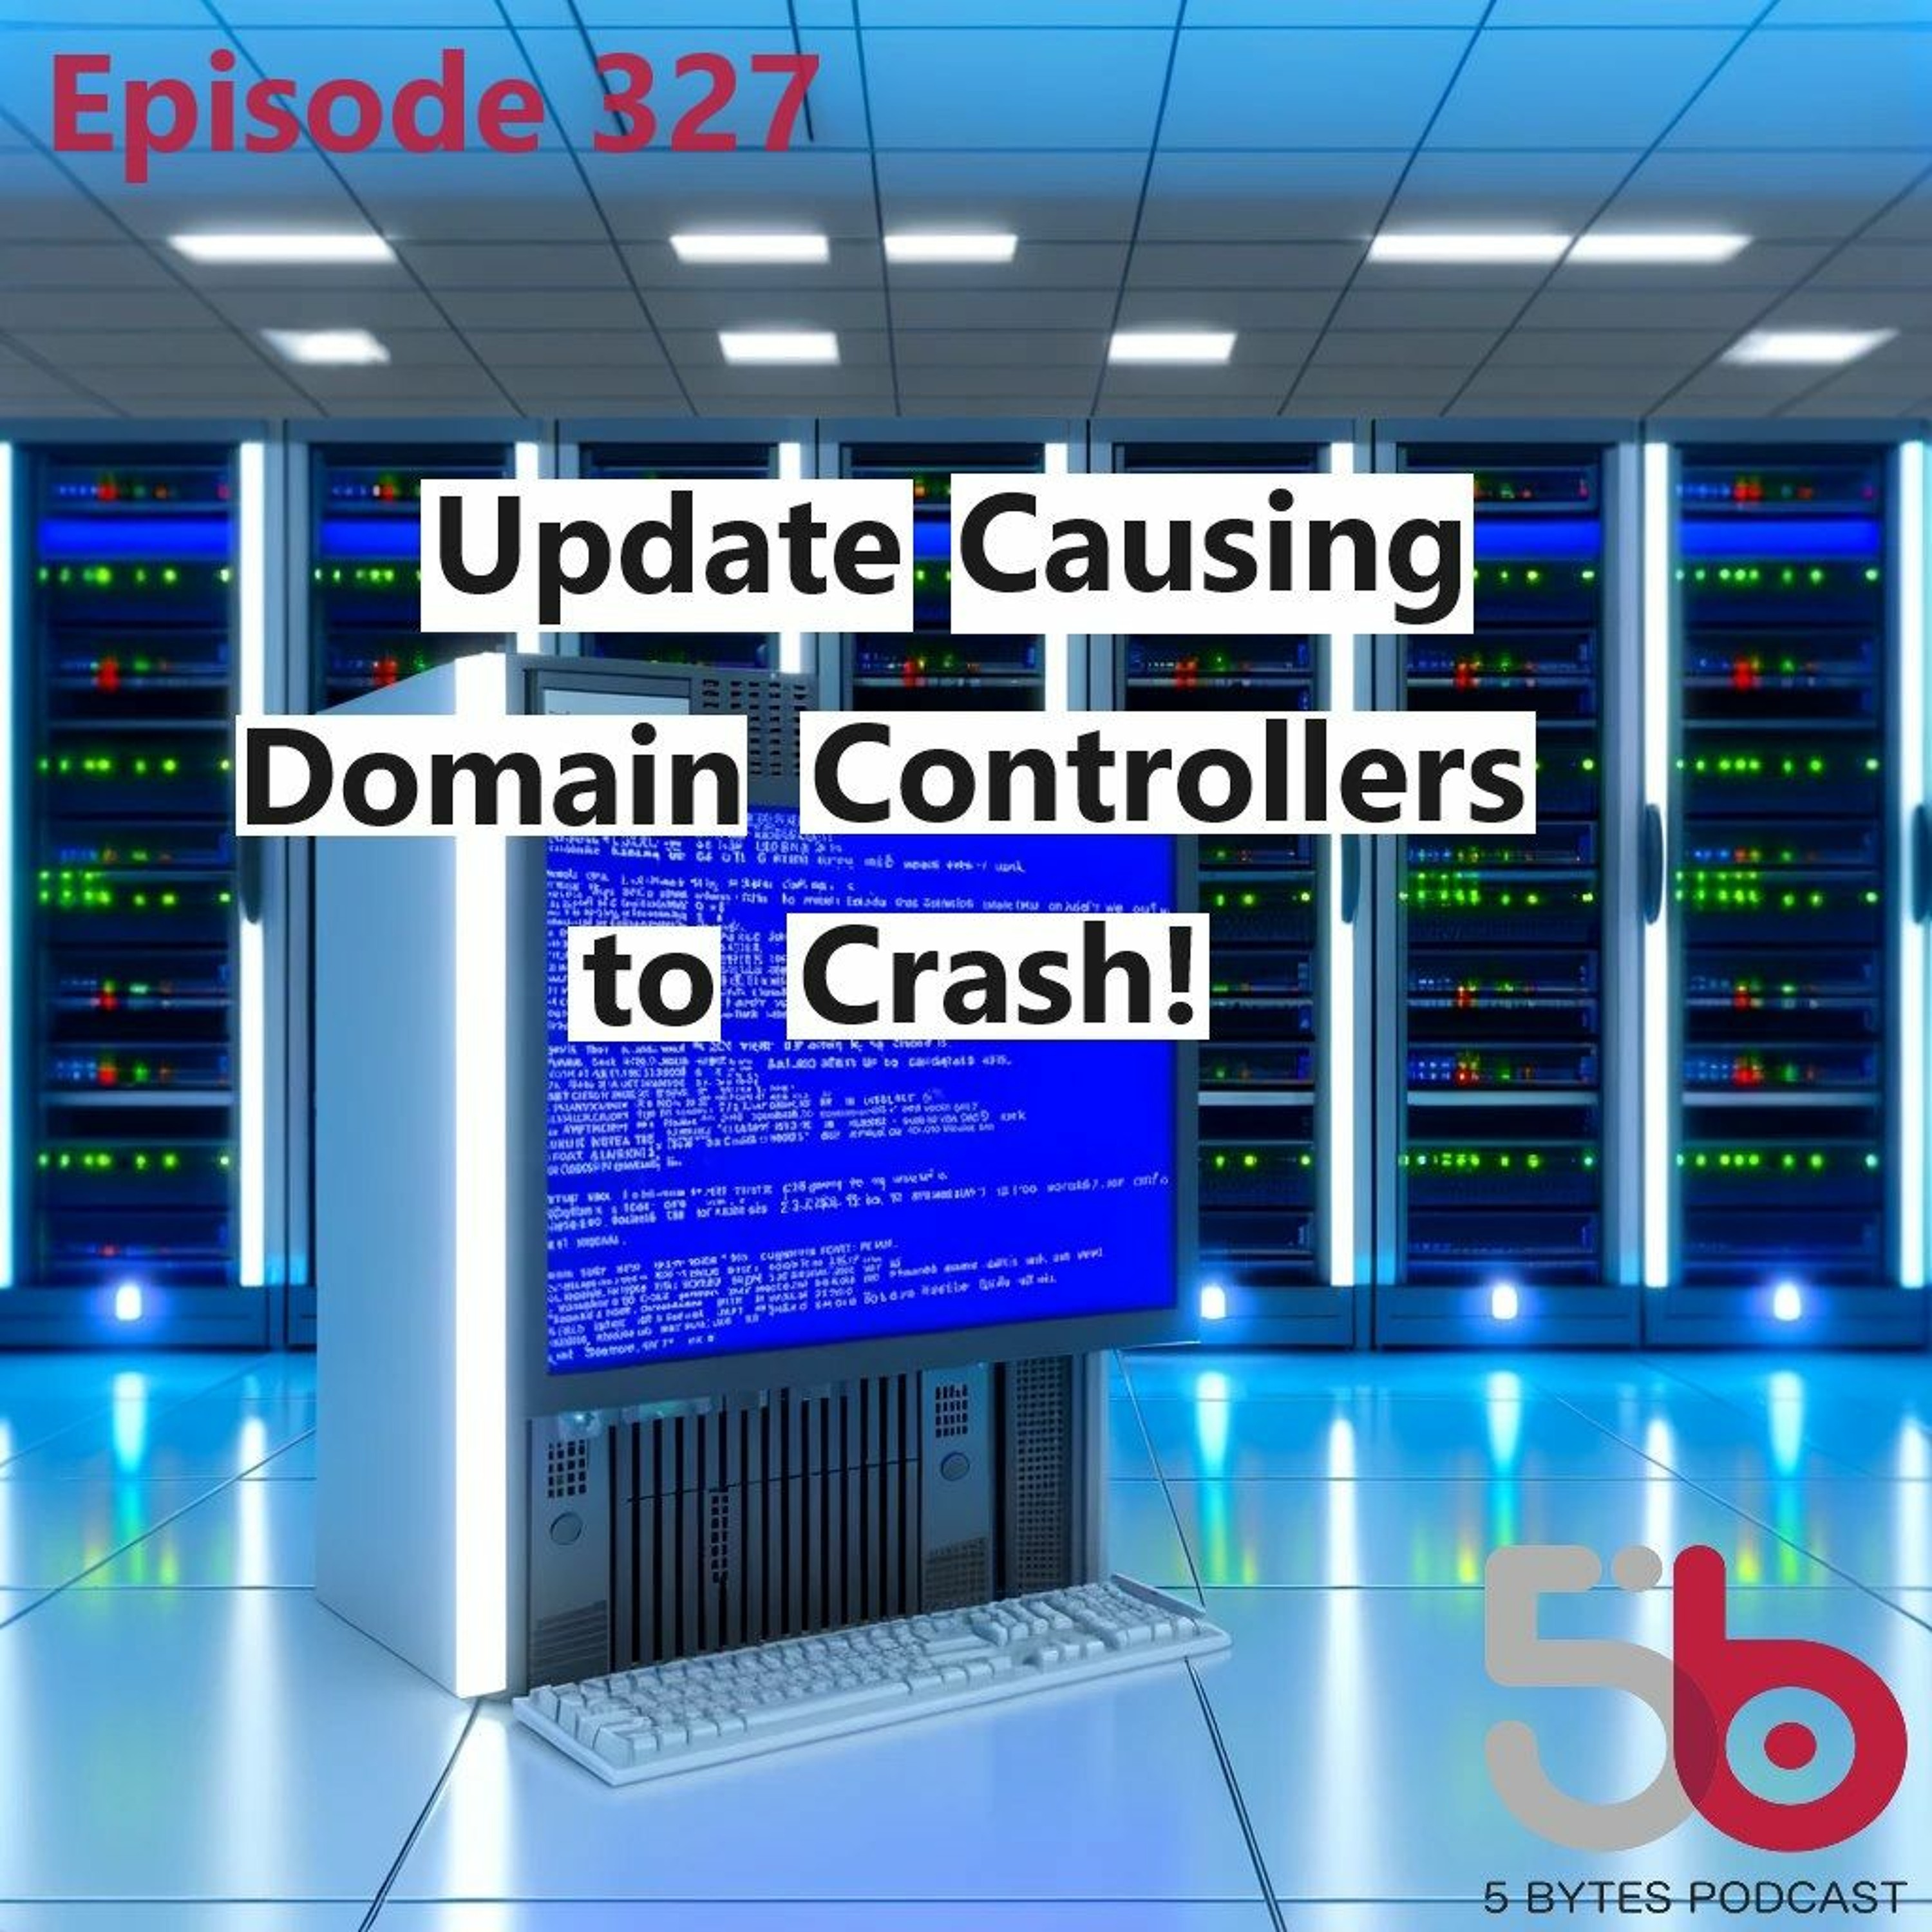 Update Causes Domain Controller Crashes! Notepad Gets Autocorrect! Unpatchable Apple Bug!